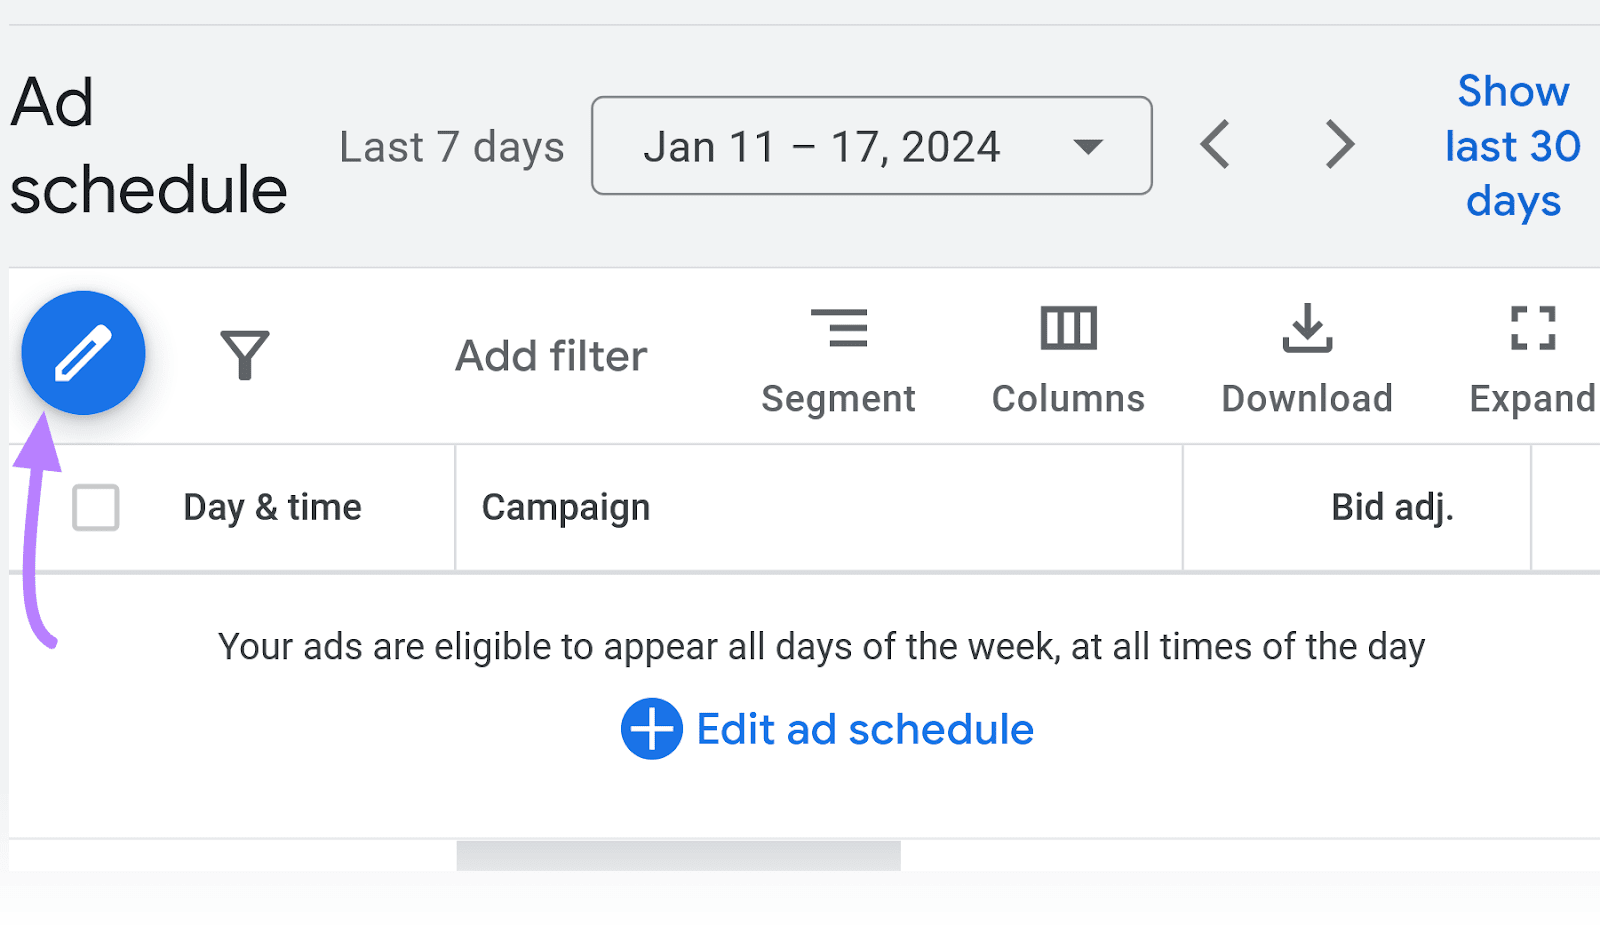 Navigating to “Ad schedule" in Google Ads